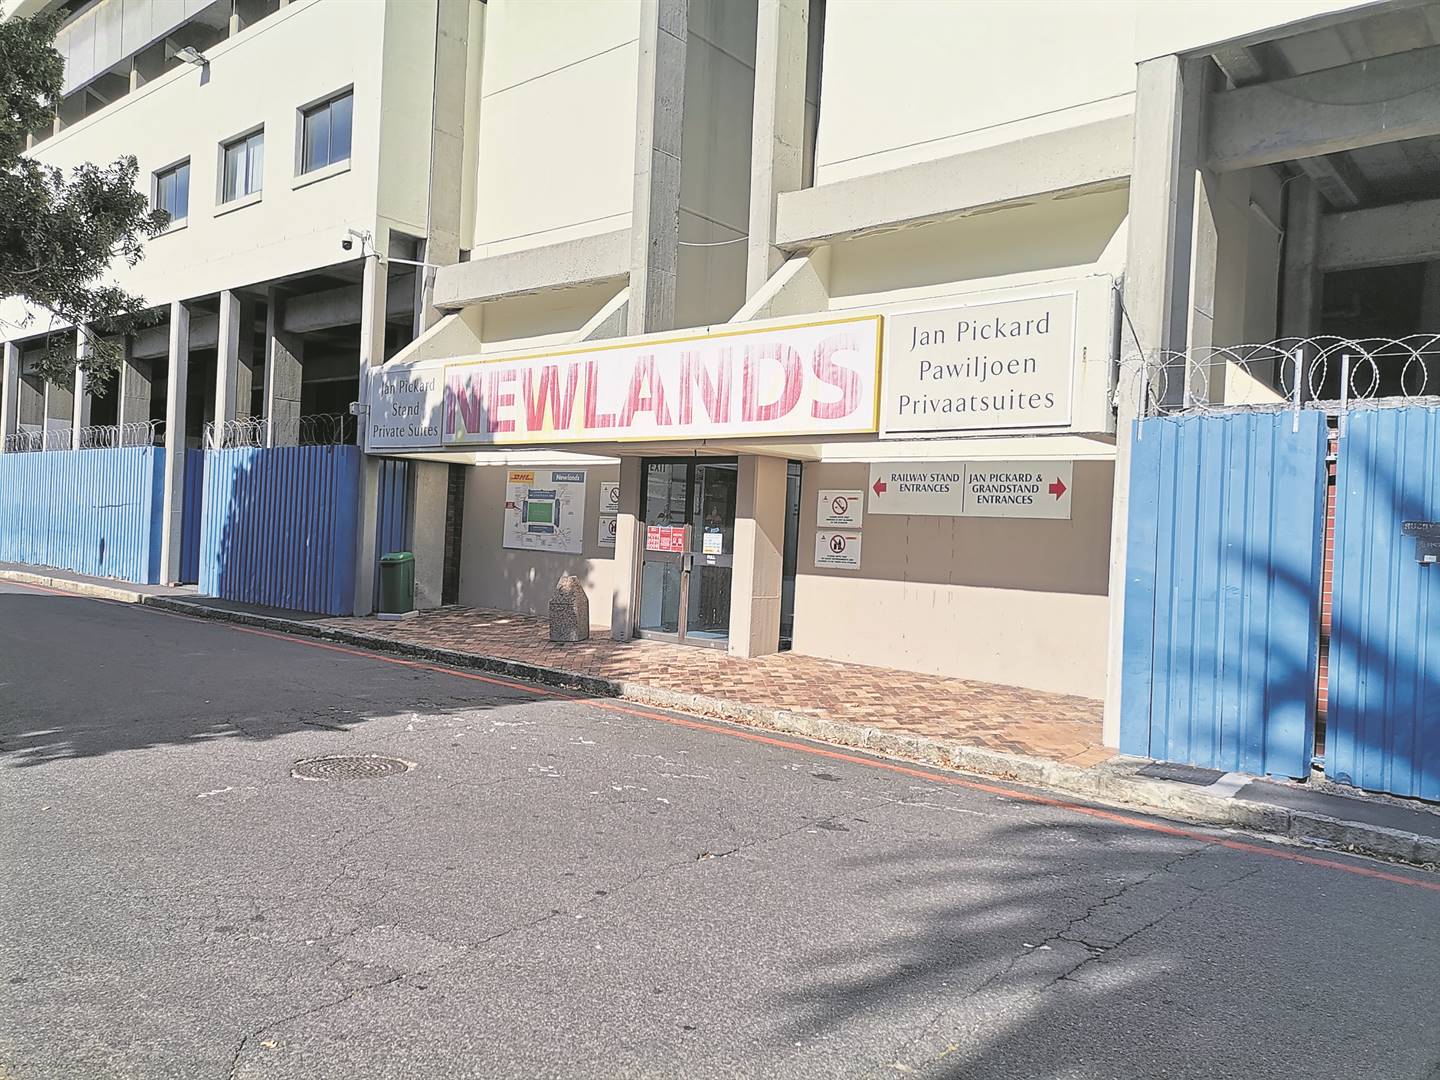 Newlands Rugby Stadium has been left empty following Western Province Rugby Football Union’s move to the Cape Town Stadium in February 2021. PHOTO: Nettalie Viljoen